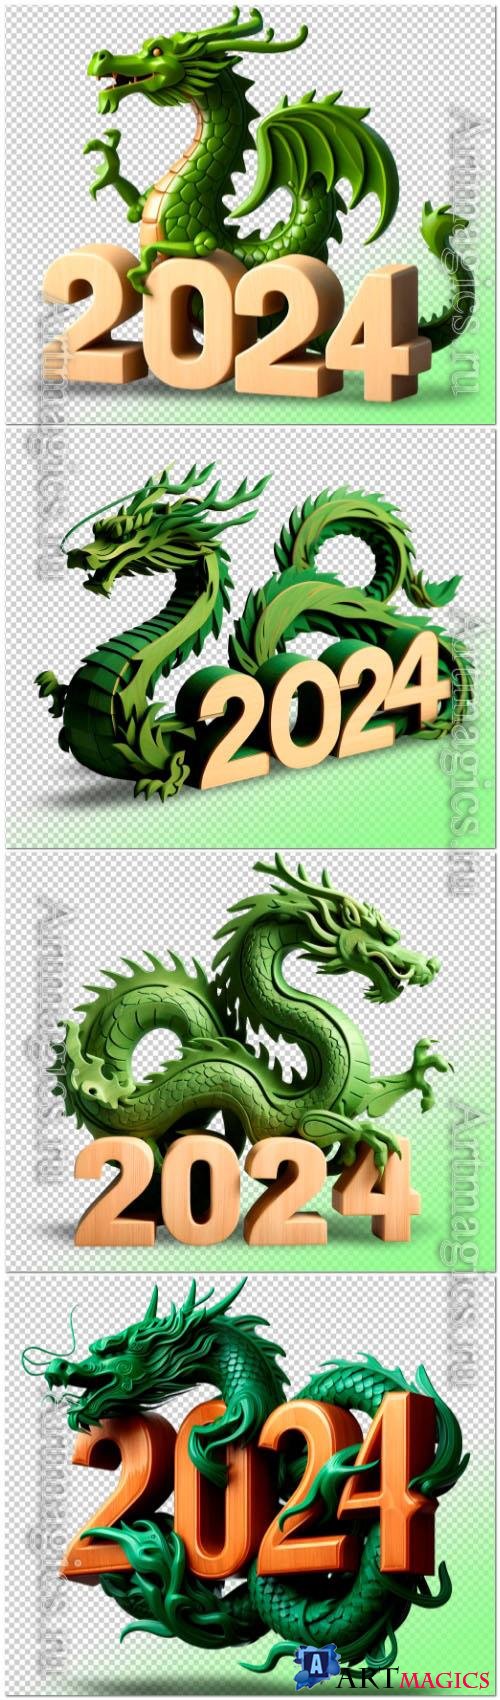 Psd symbol of year 2024 green wooden dragon